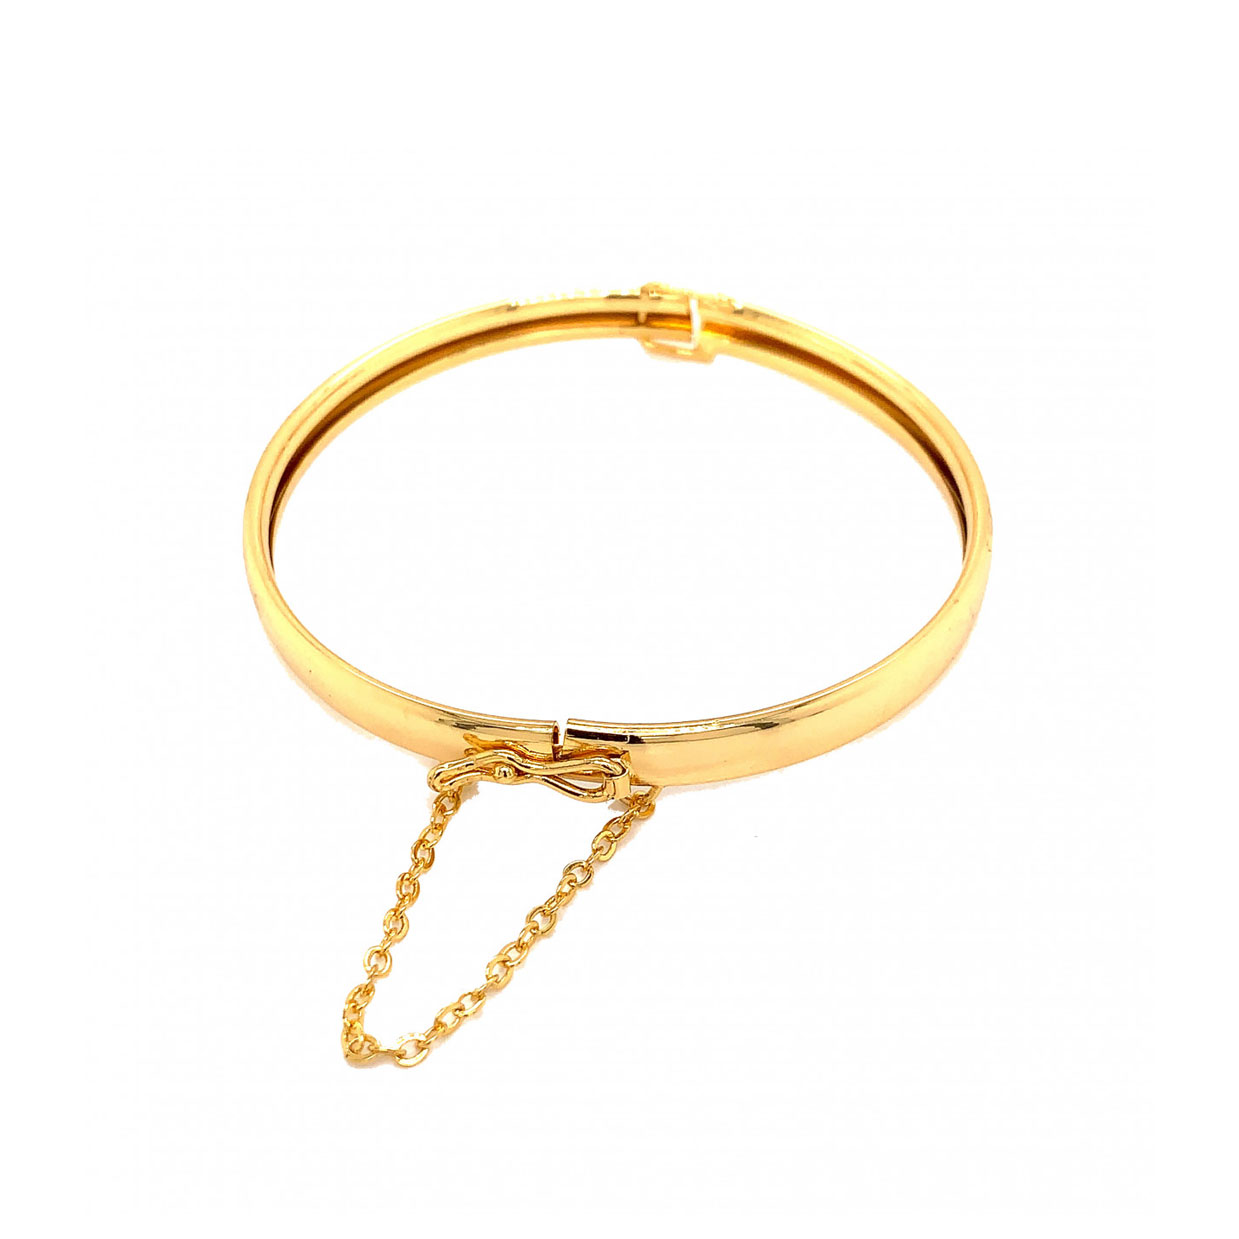 Cuff with Chain Clasp - 2" - Gold Filled